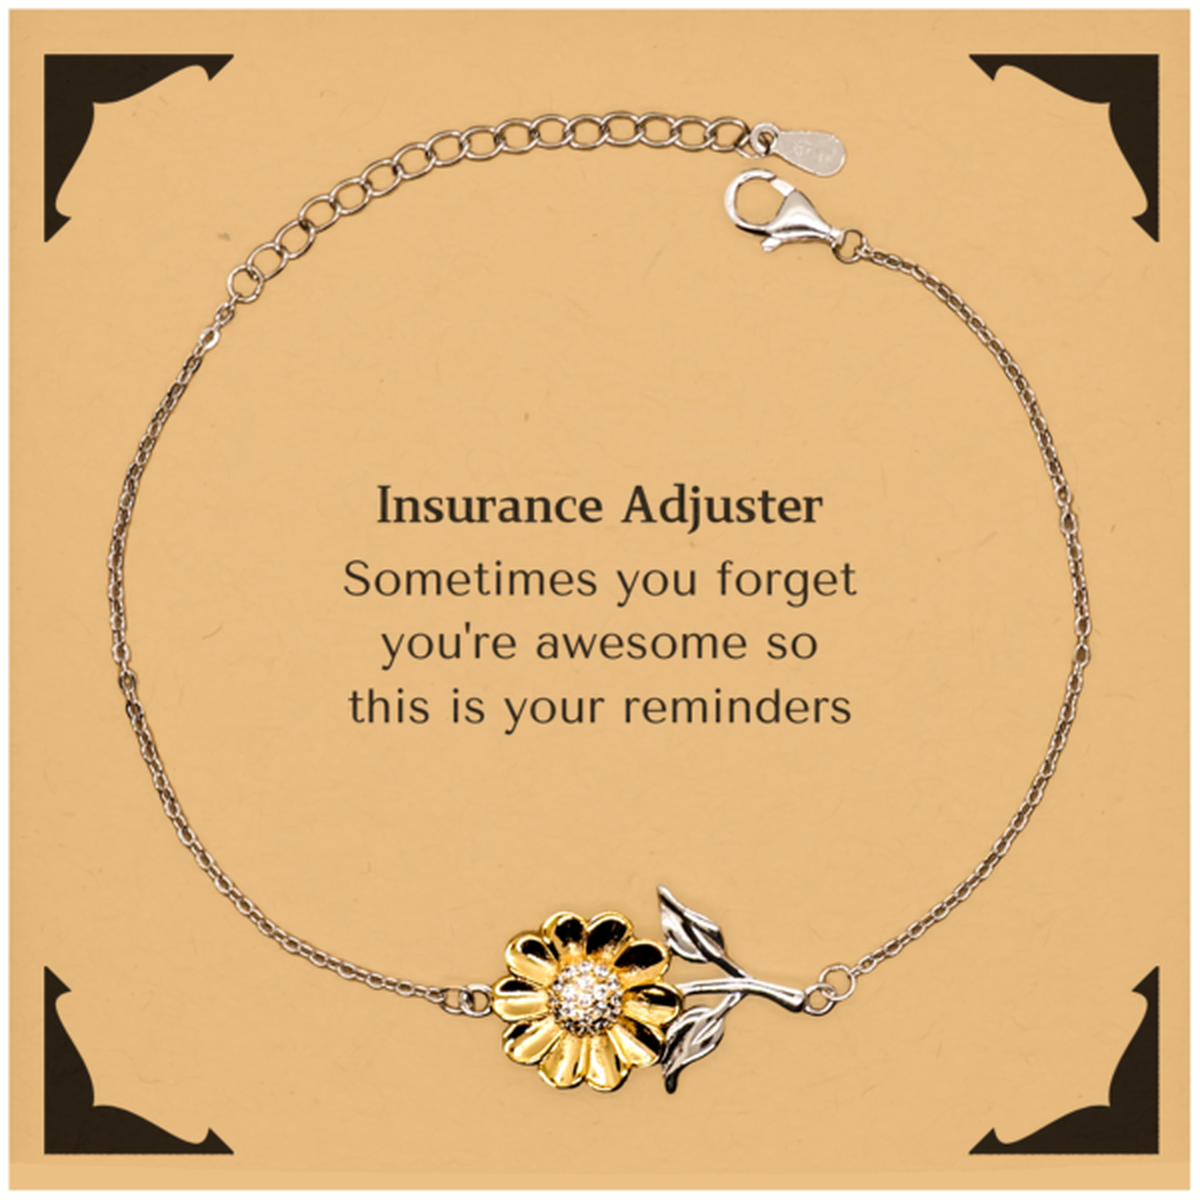 Sentimental Insurance Adjuster Sunflower Bracelet, Insurance Adjuster Sometimes you forget you're awesome so this is your reminders, Graduation Christmas Birthday Gifts for Insurance Adjuster, Men, Women, Coworkers